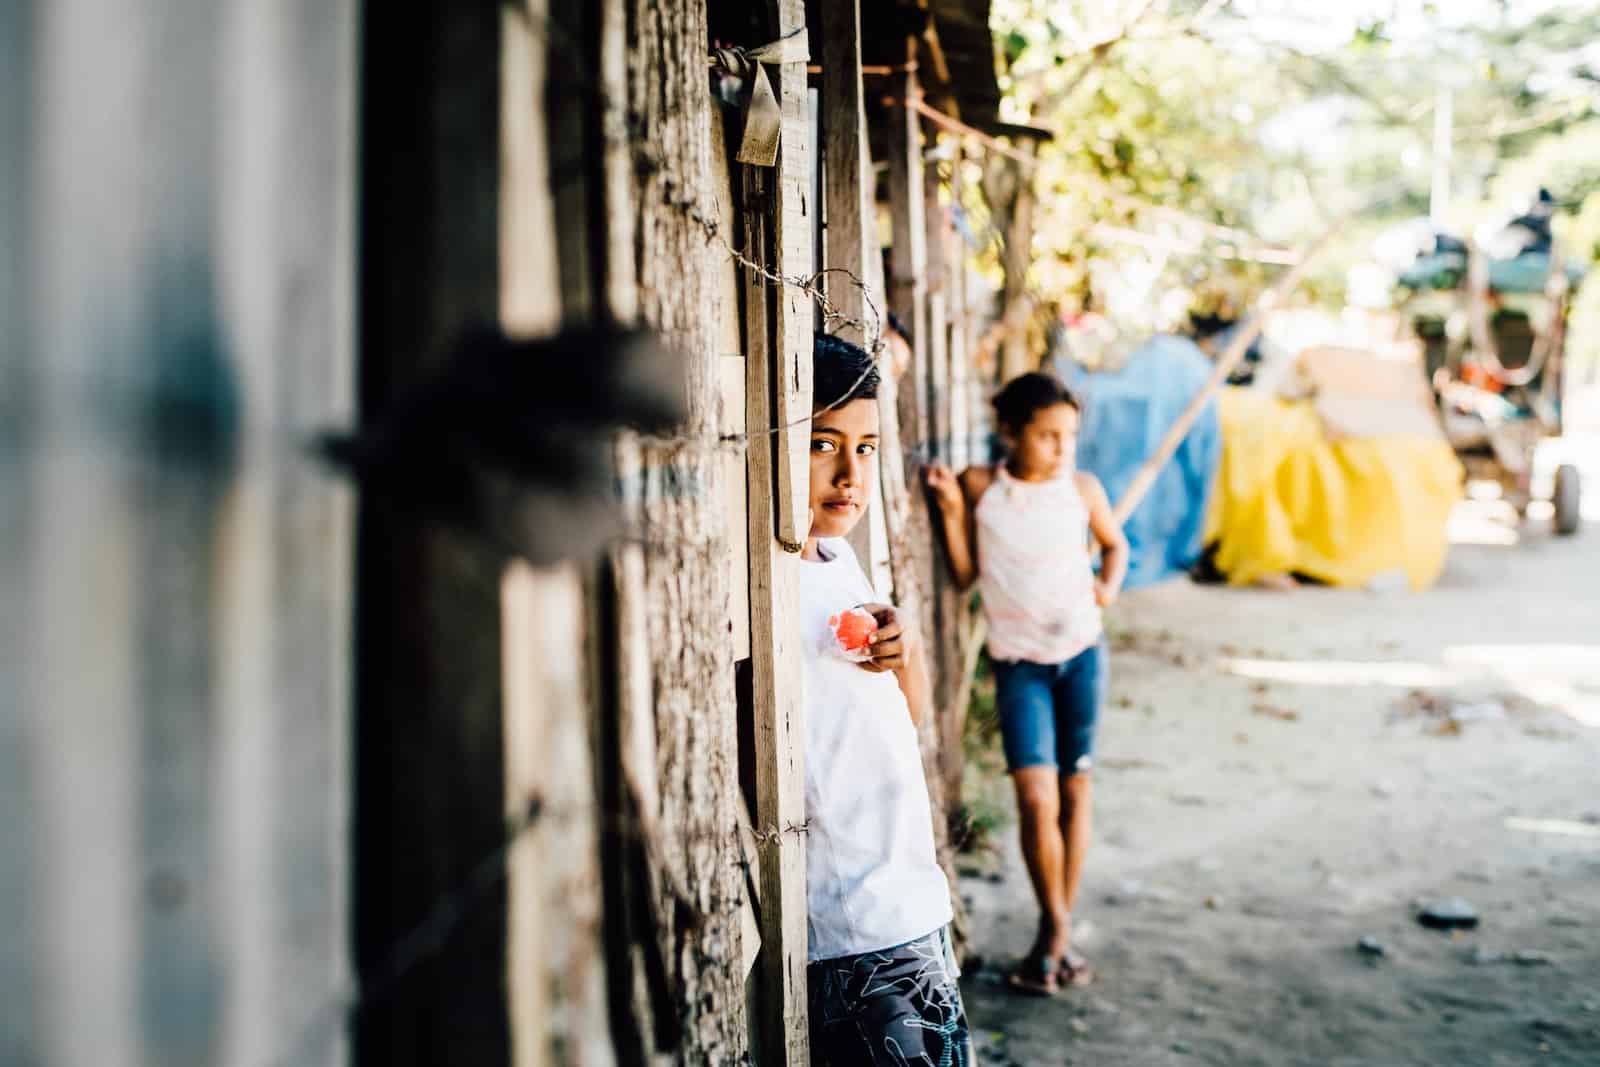 A boy stands in a wooden doorway with barbed wire fence wearing a white shirt. In the background is a girl and a dirt road.